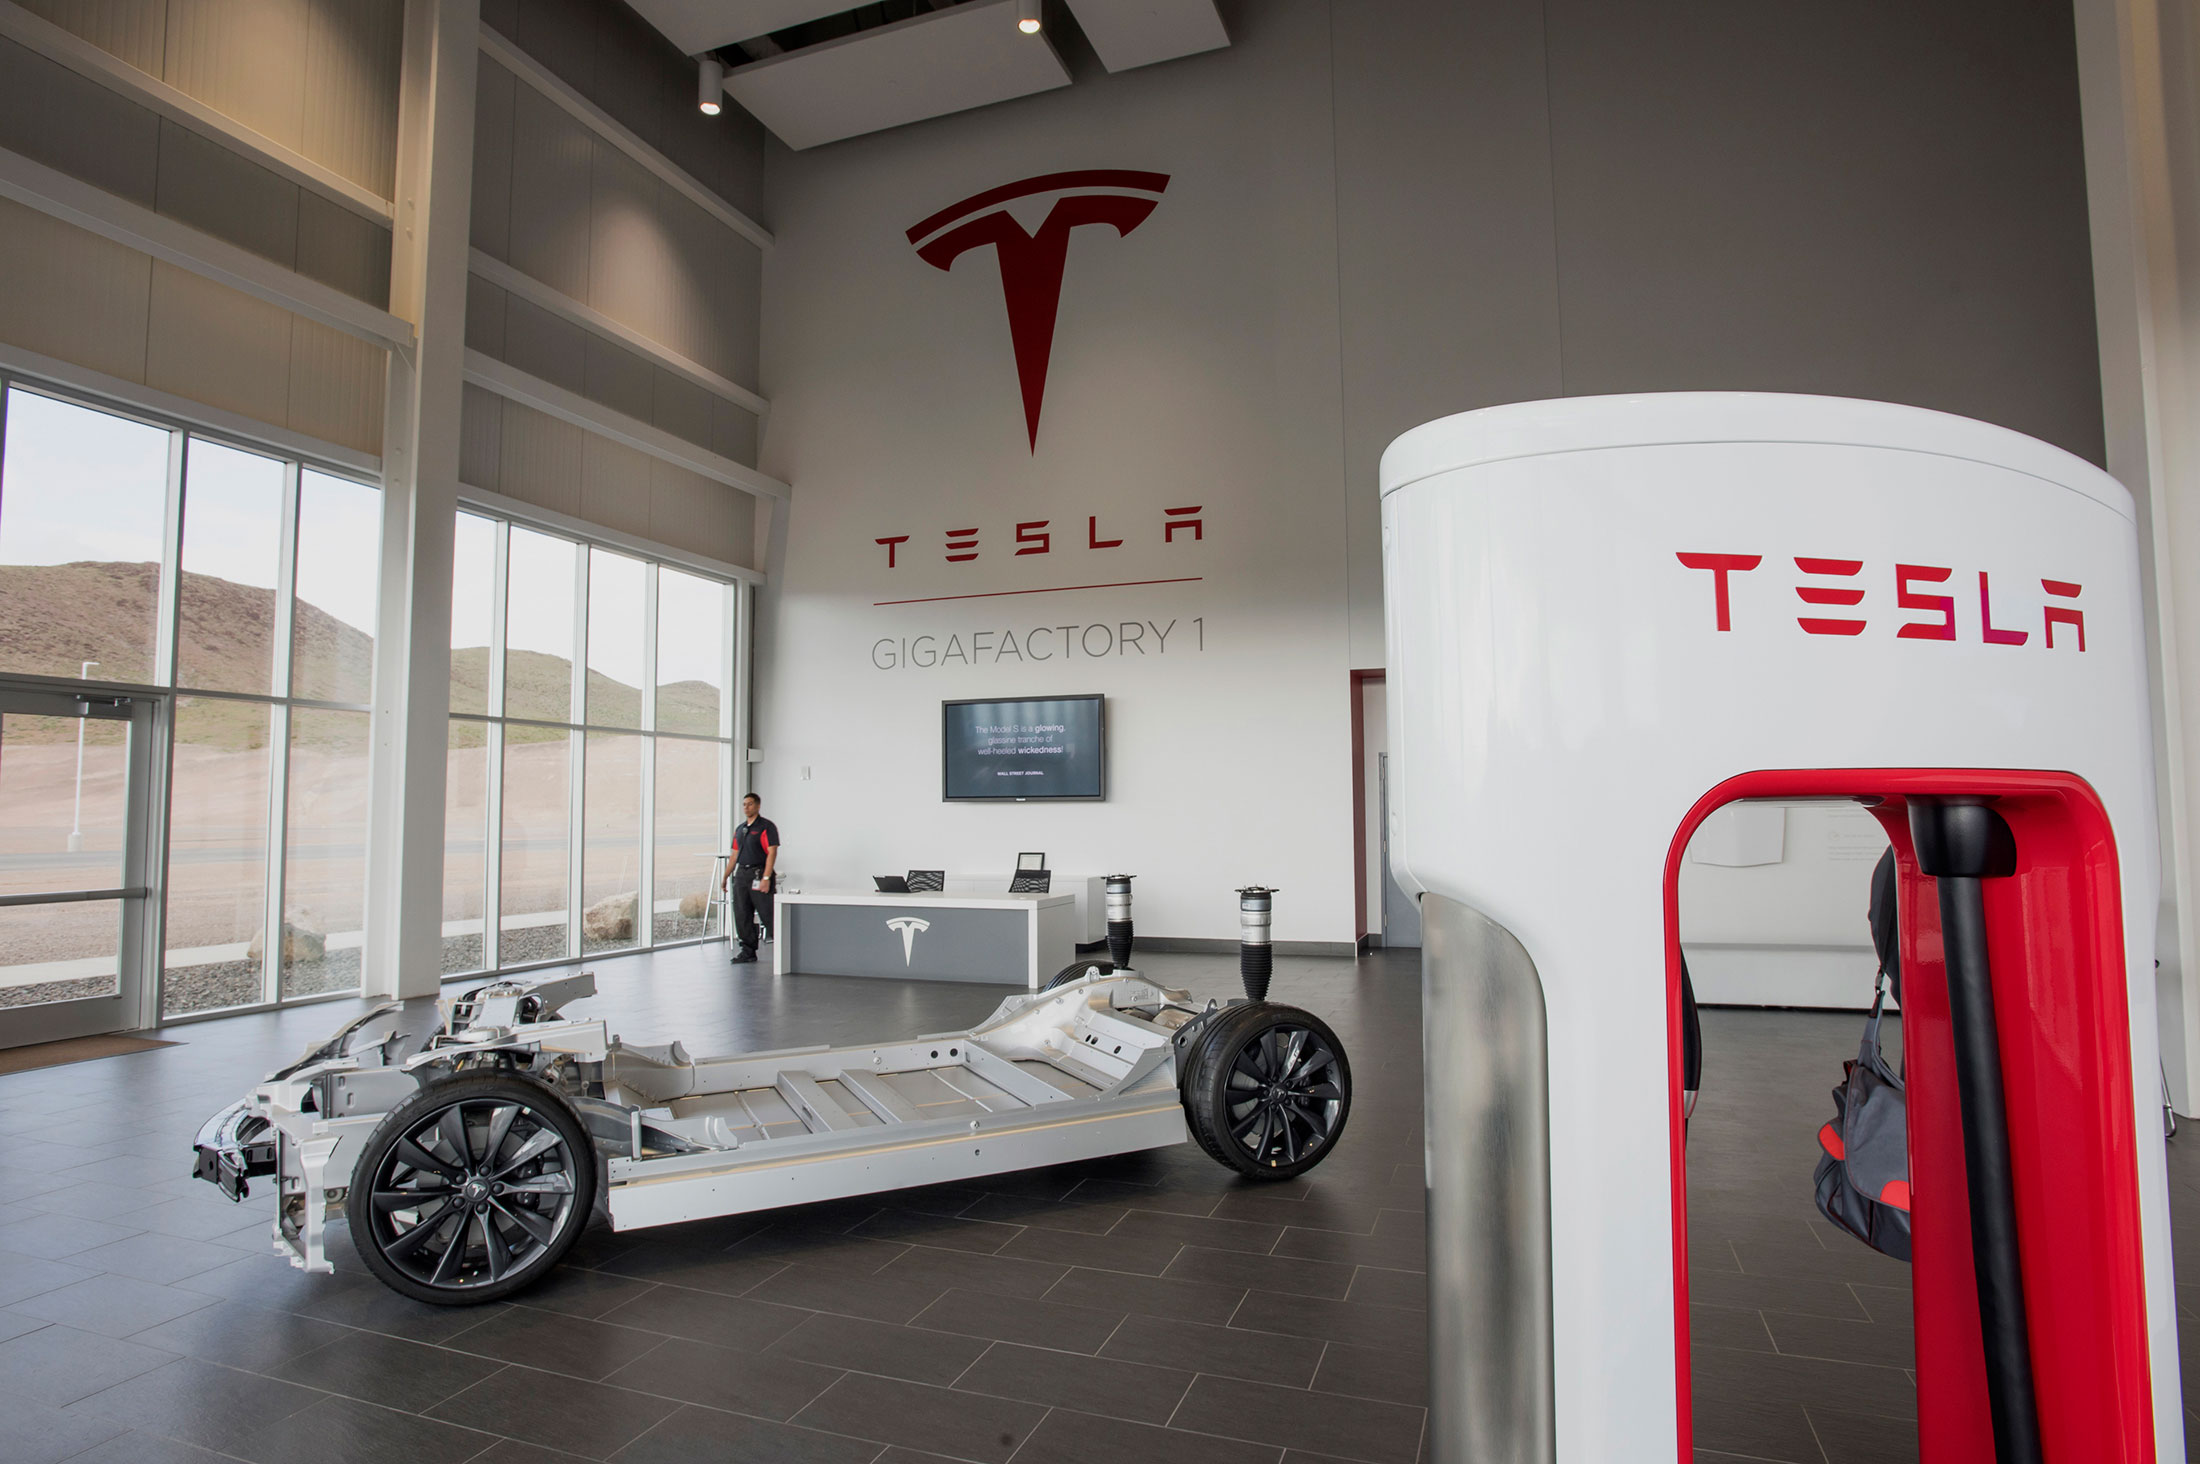 Supercharging pricing structure announced by Tesla Motors